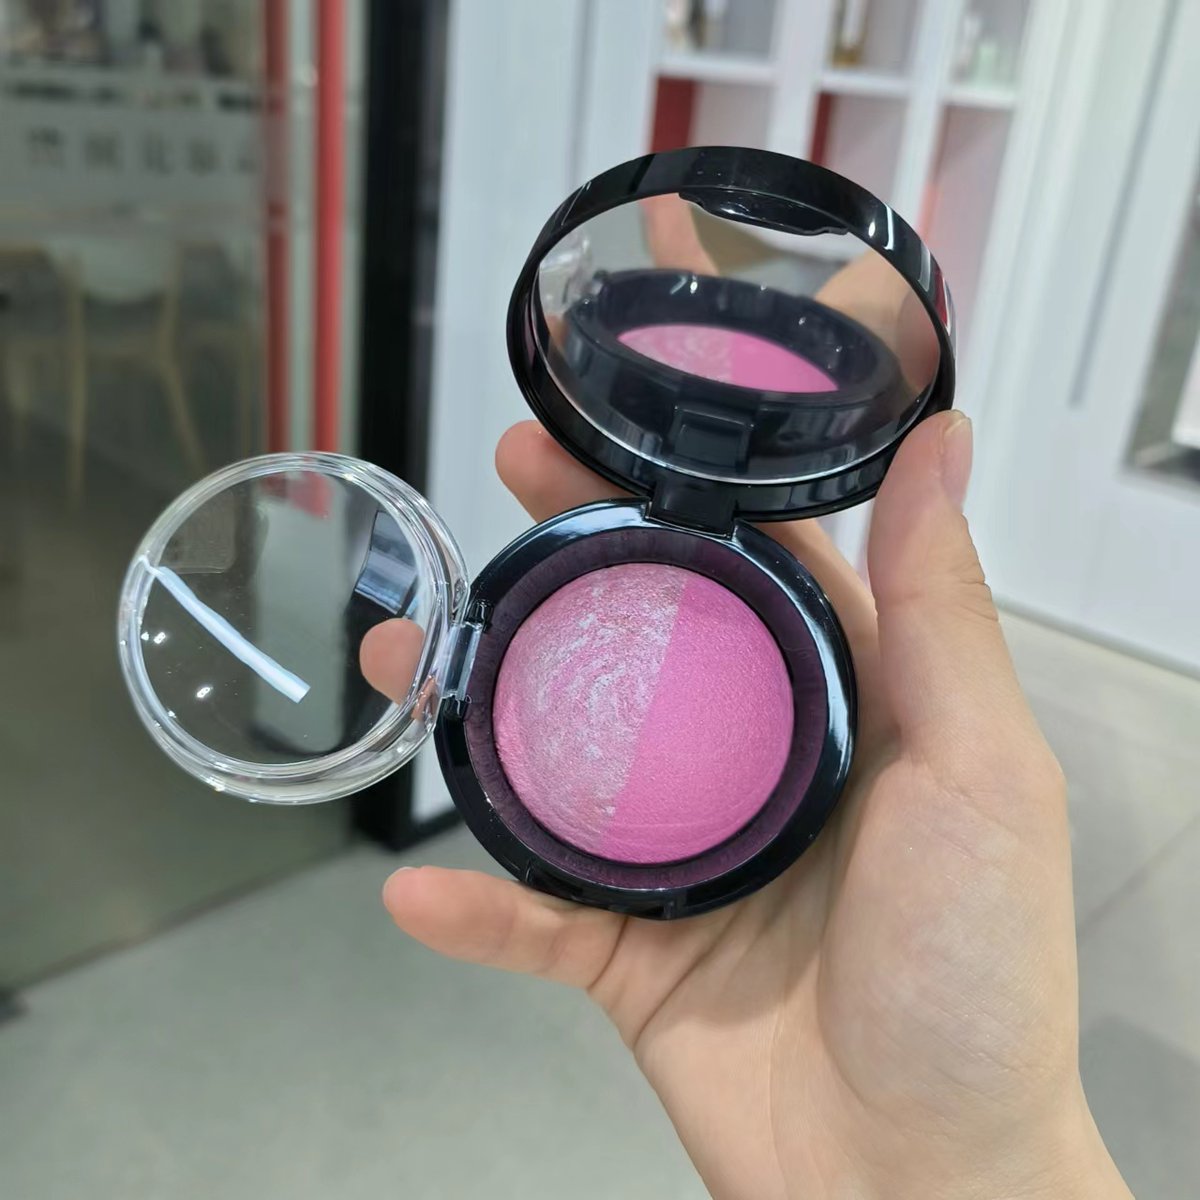 'Barbie Pink Blusher Baked Powder'
rich pigmented, cute color.
Wear this blush to watch a Barbie movie~
Shanghai Orain Cosmetics.
Feel free to message me.
#cosmetics #makeup #beautiful #beauty #blush #cute #Barbie #barbiepink #BarbieMovie #pink #girl #girlmakeup #manufacturing